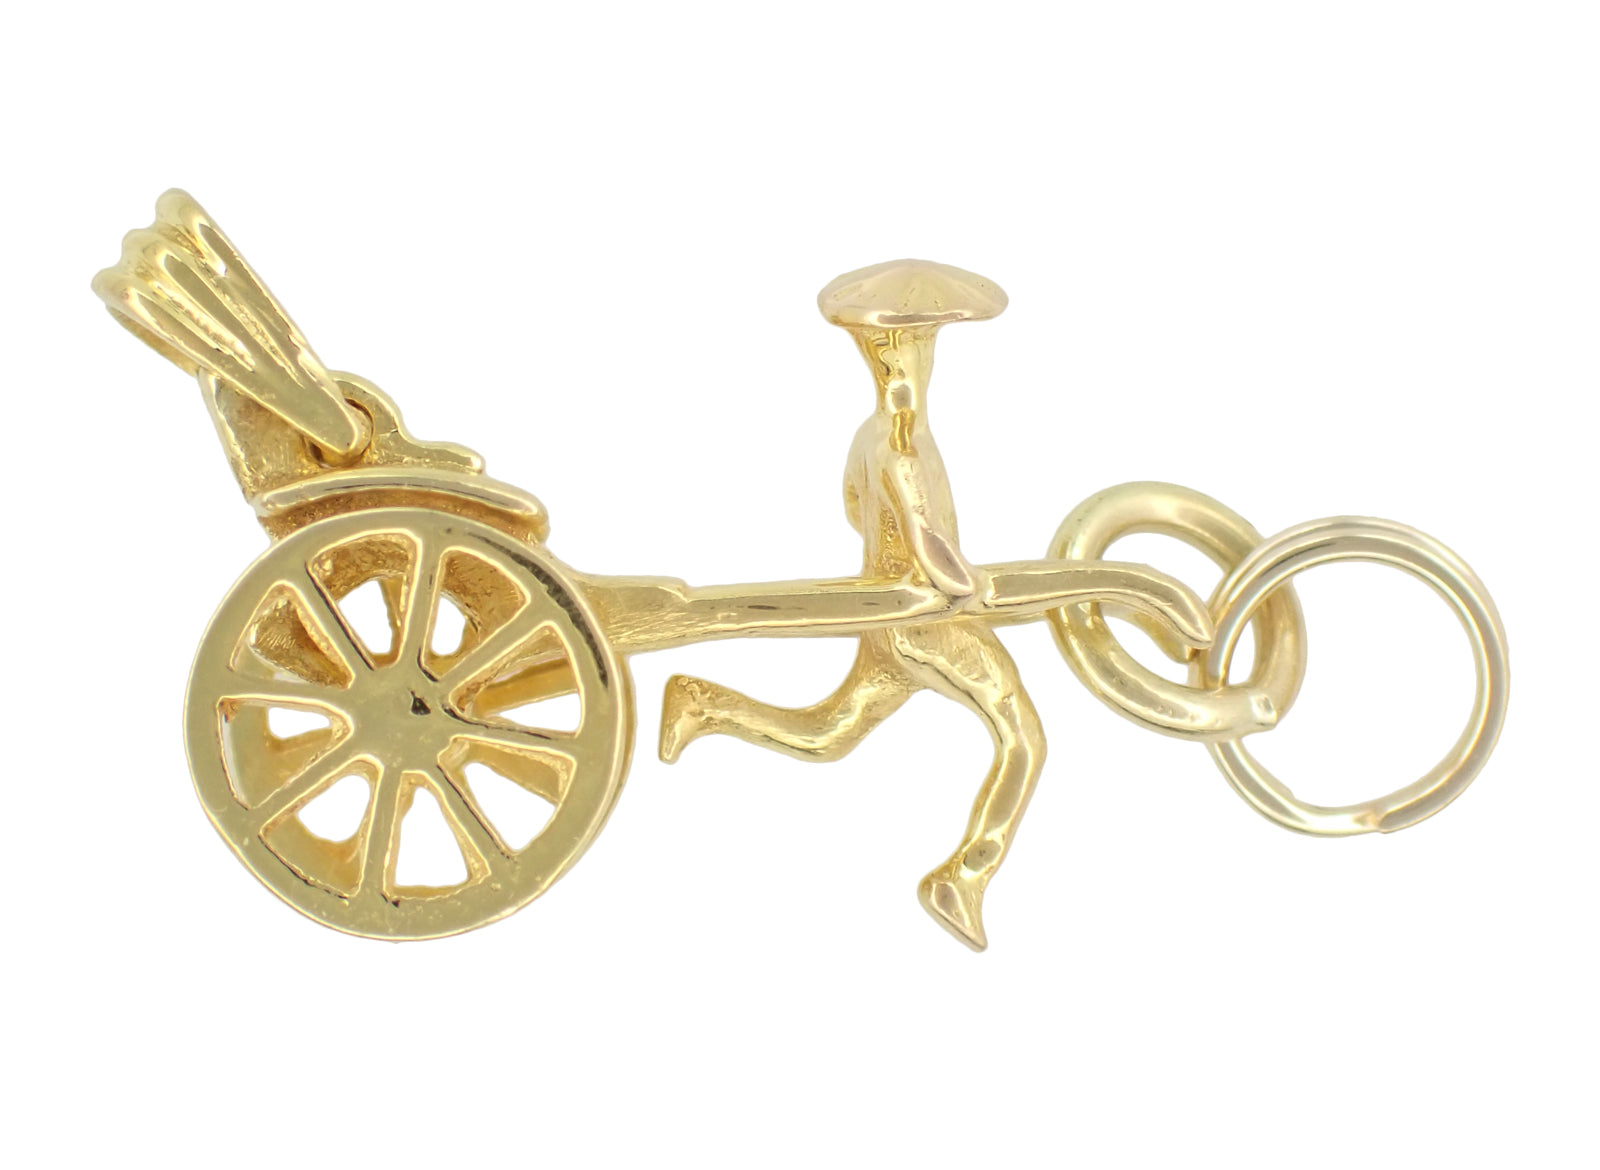 Vintage Rickshaw Charm with Movable Wheels in 14 Karat Yellow Gold